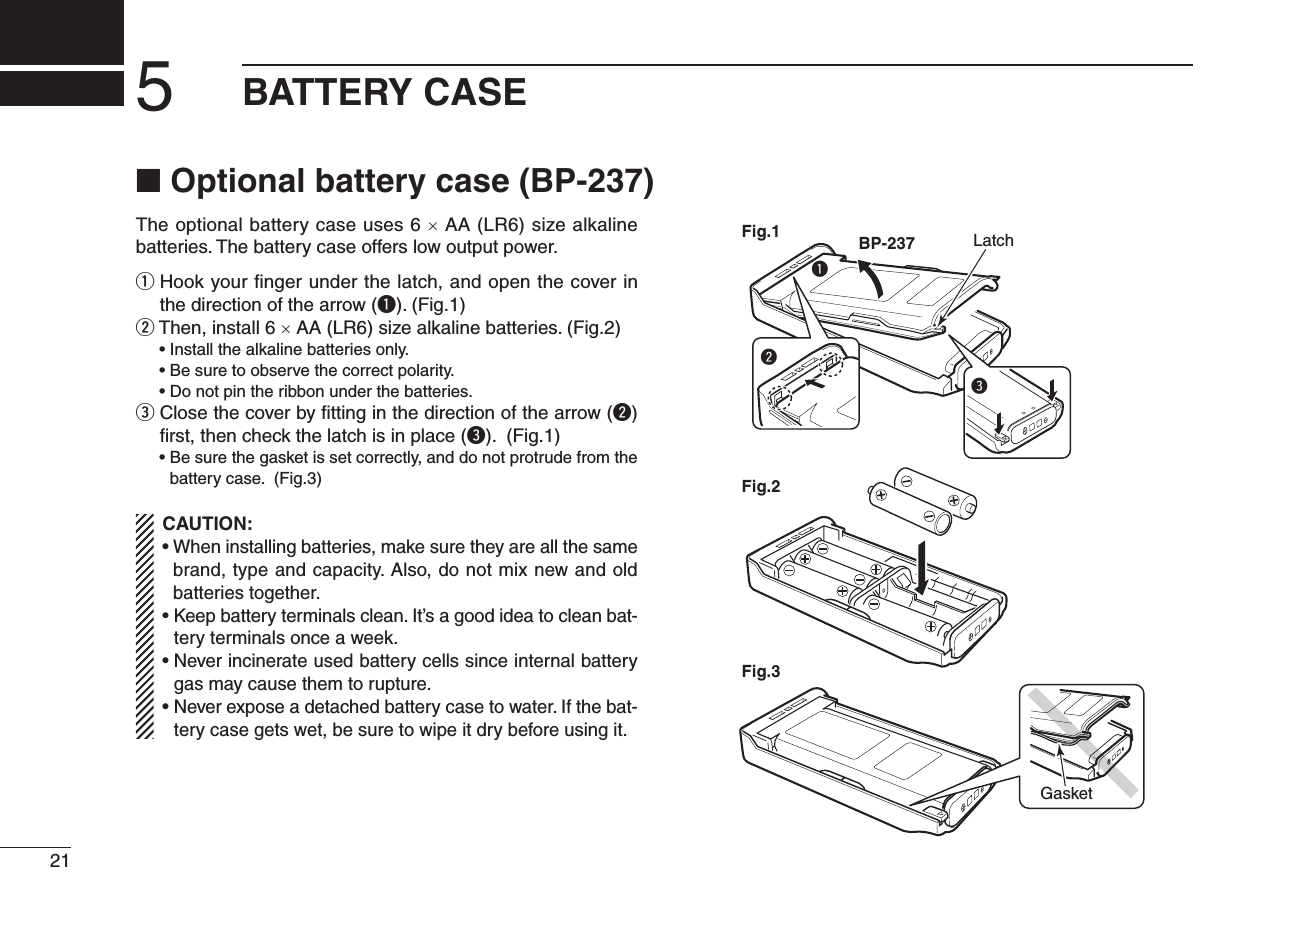 ■ Optional battery case (BP-237)The optional battery case uses 6 × AA (LR6) size alkaline batteries. The battery case offers low output power.q  Hook your ﬁnger under the latch, and open the cover in the direction of the arrow (q). (Fig.1)w  Then, install 6 × AA (LR6) size alkaline batteries. (Fig.2)  • Install the alkaline batteries only.  • Be sure to observe the correct polarity.  • Do not pin the ribbon under the batteries.e  Close the cover by ﬁtting in the direction of the arrow (w) ﬁrst, then check the latch is in place (e). (Fig.1)  •  Be sure the gasket is set correctly, and do not protrude from the battery case. (Fig.3)CAUTION:•  When installing batteries, make sure they are all the same brand, type and capacity. Also, do not mix new and old batteries together.•  Keep battery terminals clean. It’s a good idea to clean bat-tery terminals once a week.•  Never incinerate used battery cells since internal battery gas may cause them to rupture.•  Never expose a detached battery case to water. If the bat-tery case gets wet, be sure to wipe it dry before using it.qBP-237Fig.1Fig.2Fig.3eLatchwGasket215BATTERY CASE